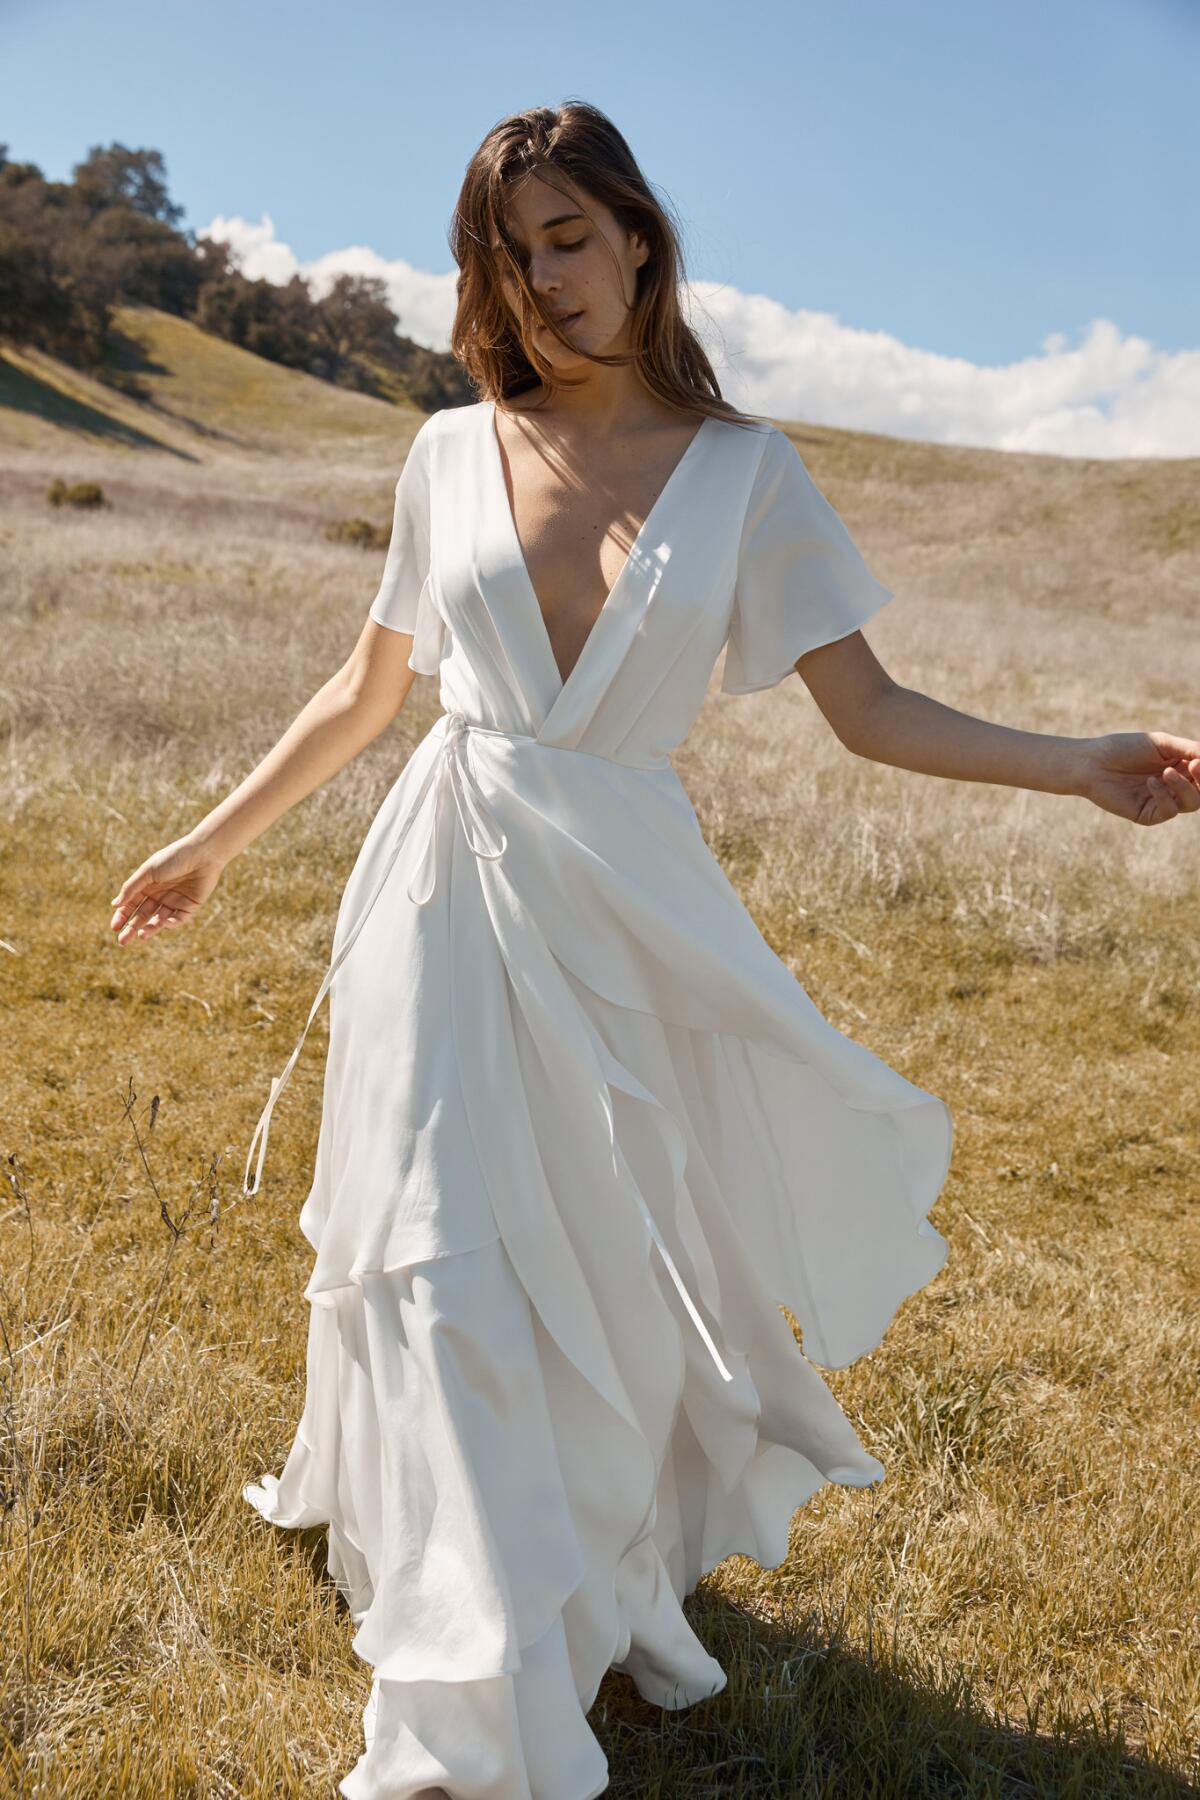 Here's the Athena dress ($1,800) from Christy Dawn's bridal collection.